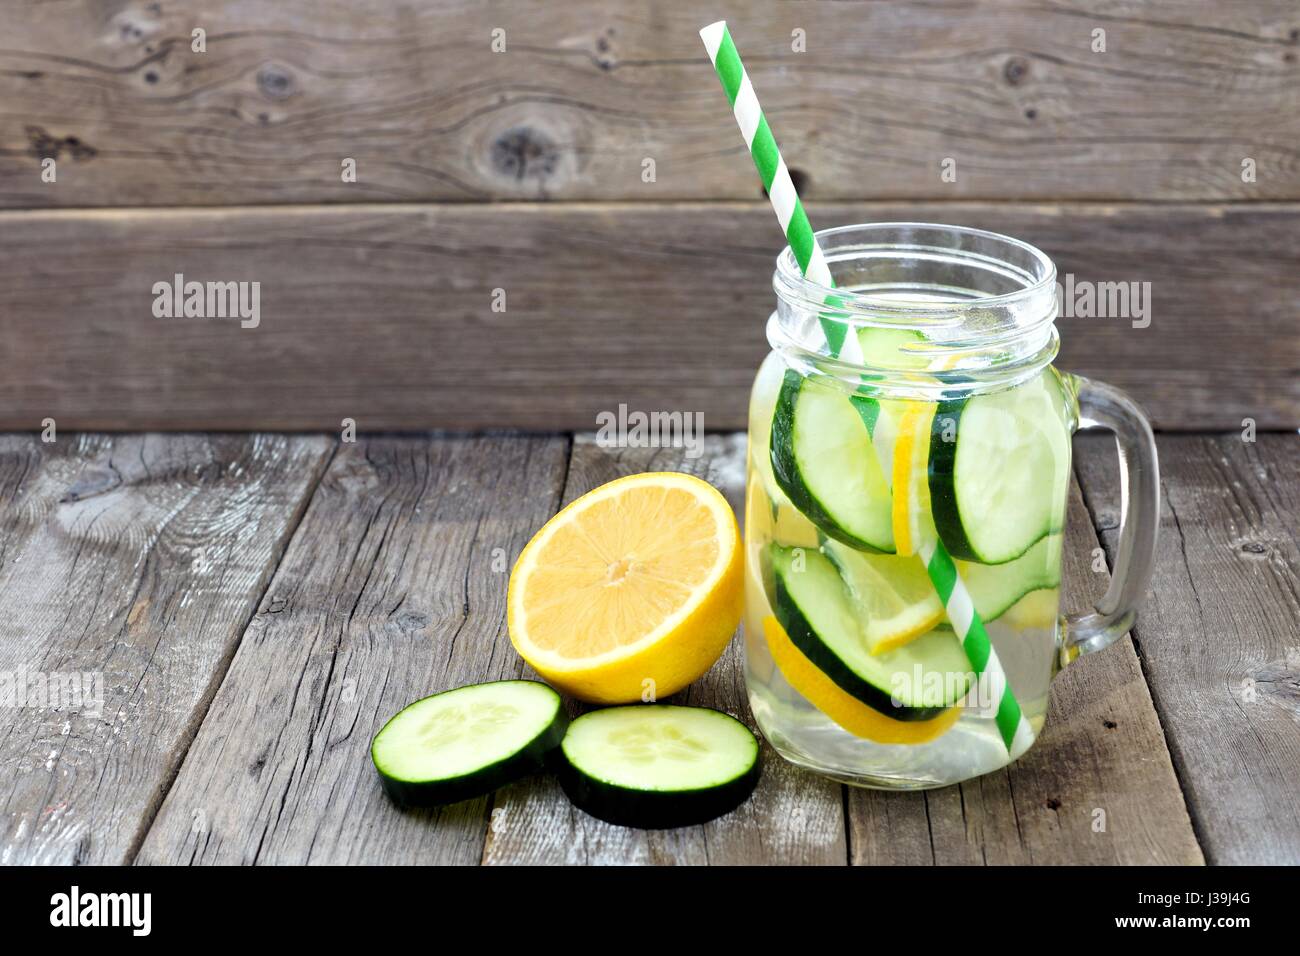 Lemon cucumber detox water in a mason jar glass with straw and slices against a rustic wood background Stock Photo